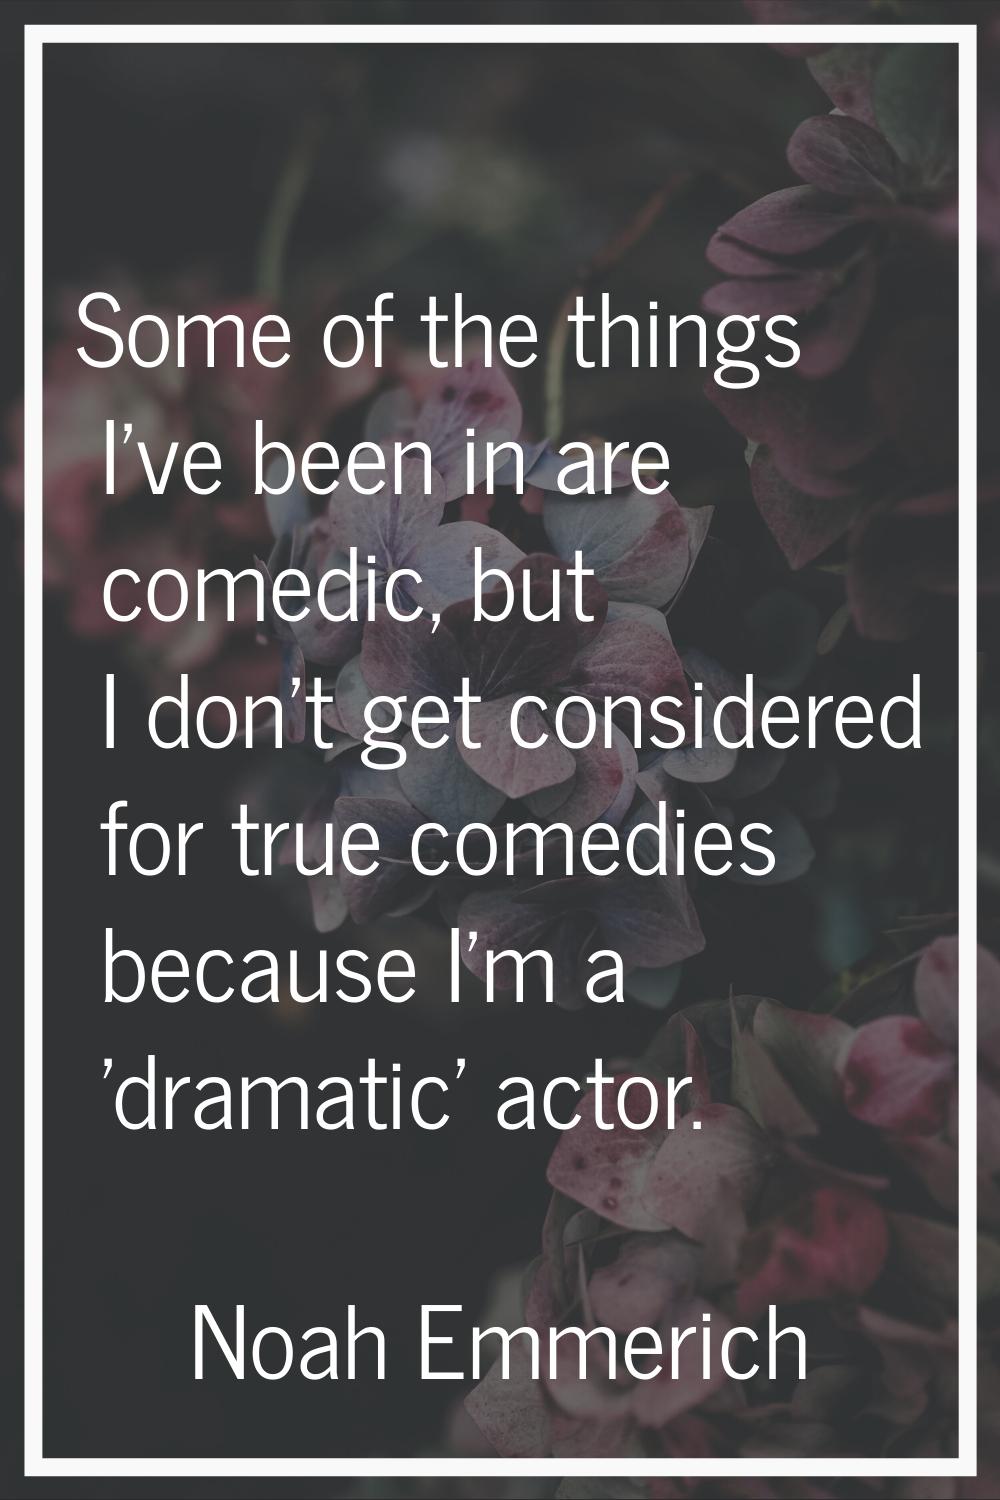 Some of the things I've been in are comedic, but I don't get considered for true comedies because I